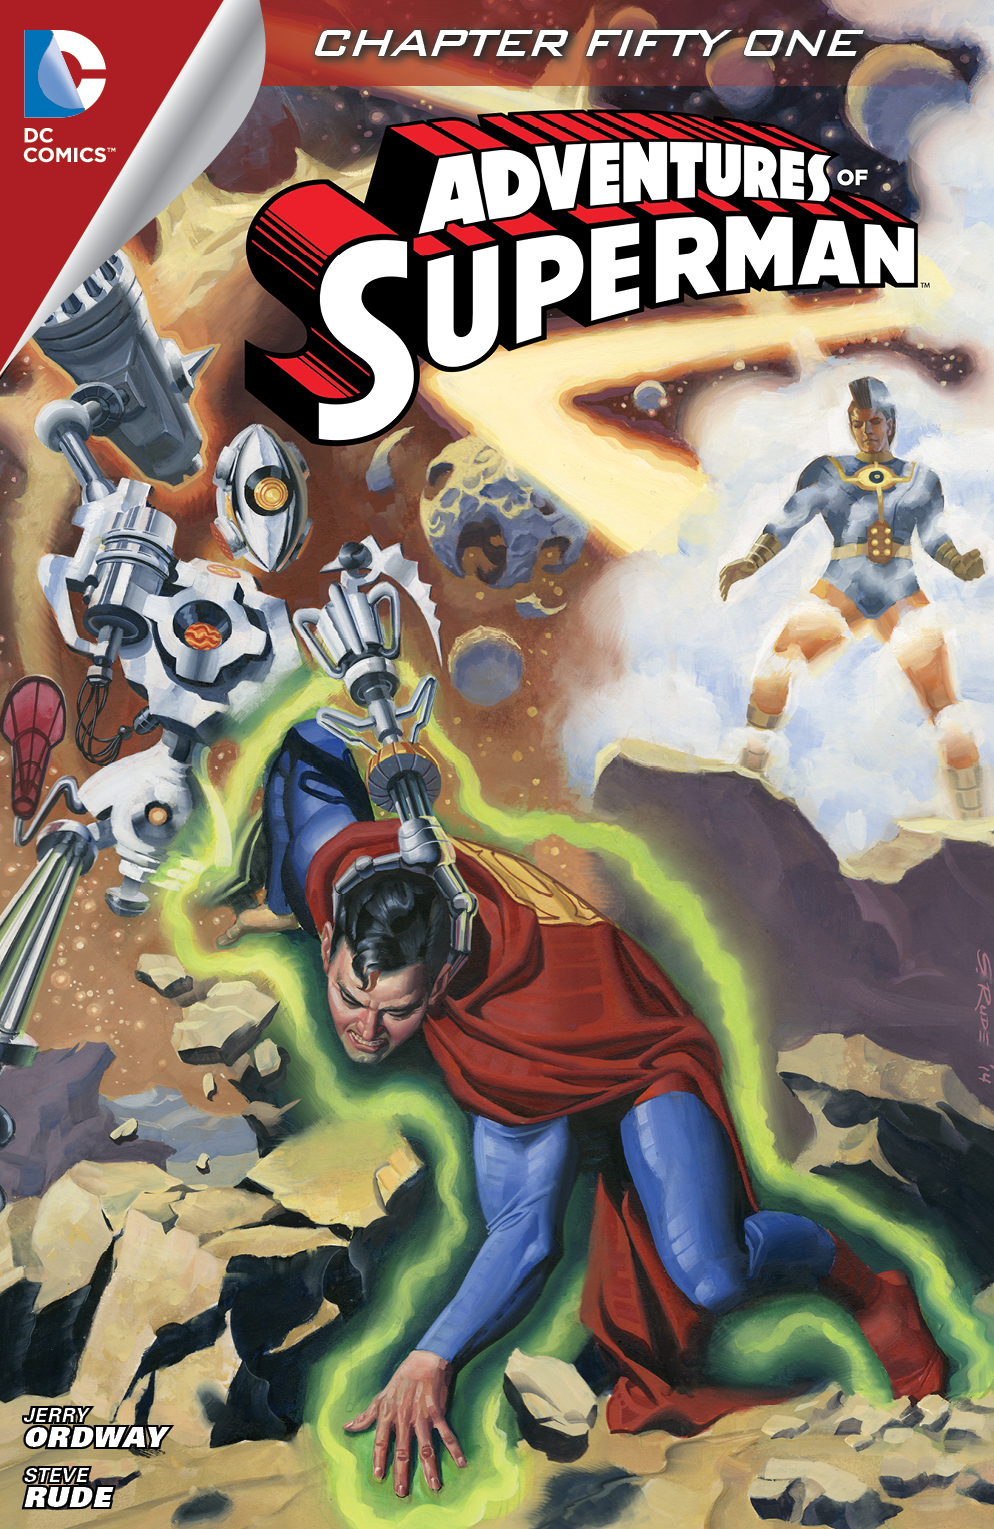 Adventures of Superman (2013-) #51 preview images